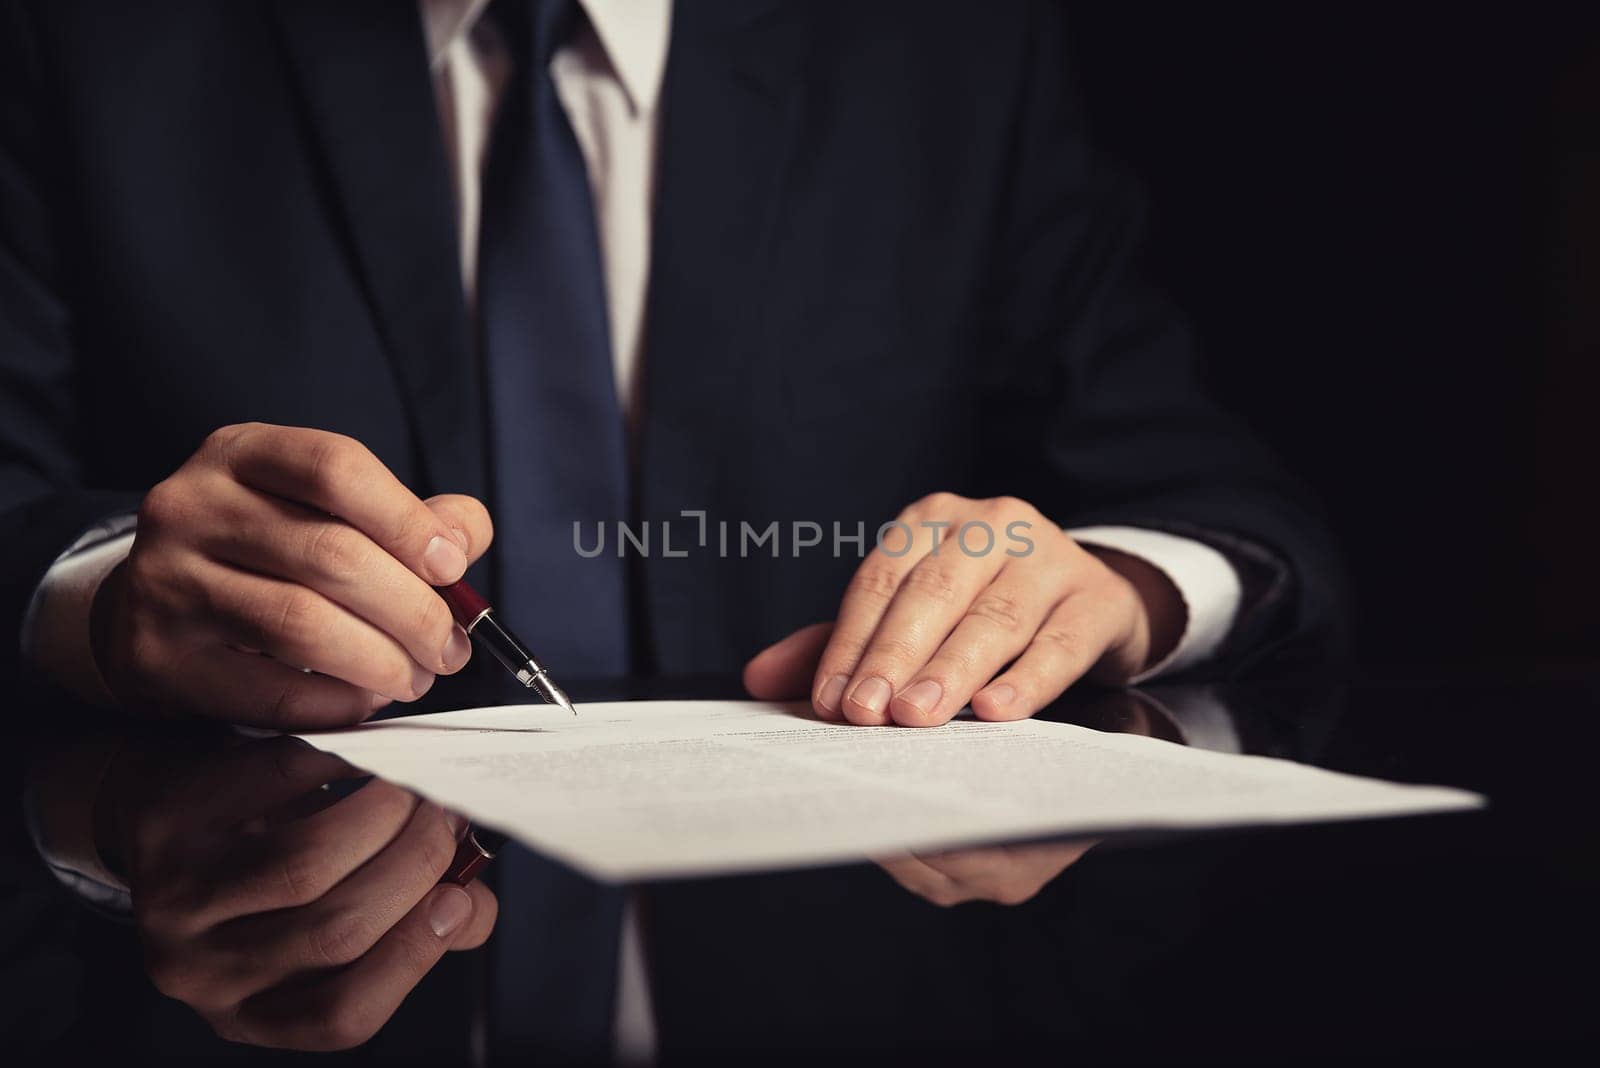 Notary working in office. Lawyer, attorney, business person signing a contract, working in office